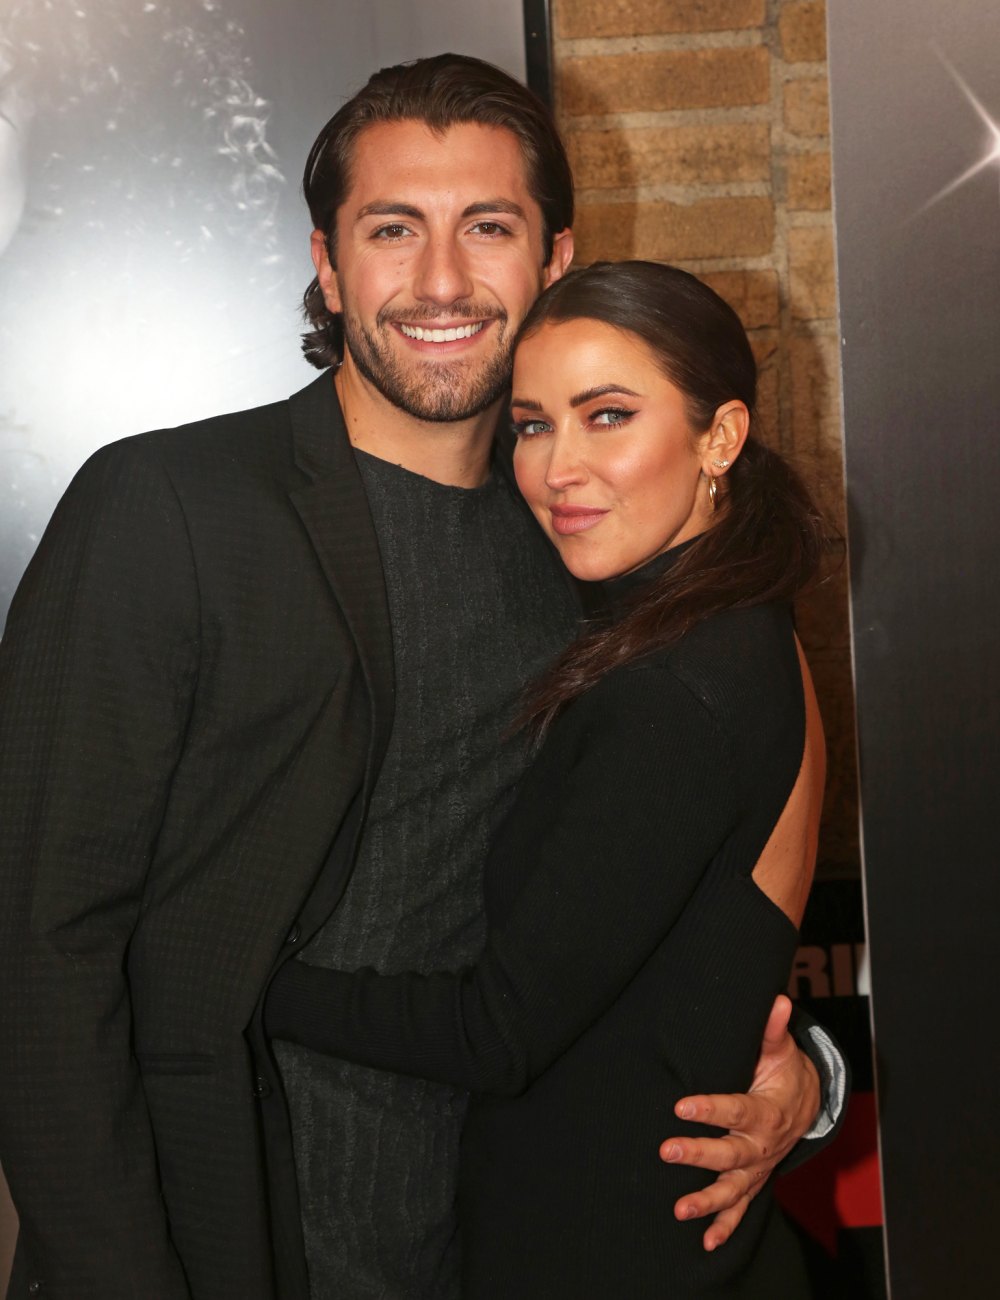 Jason Tartick and Kaitlyn Bristowe Have Great Reunion 3 Months After Split